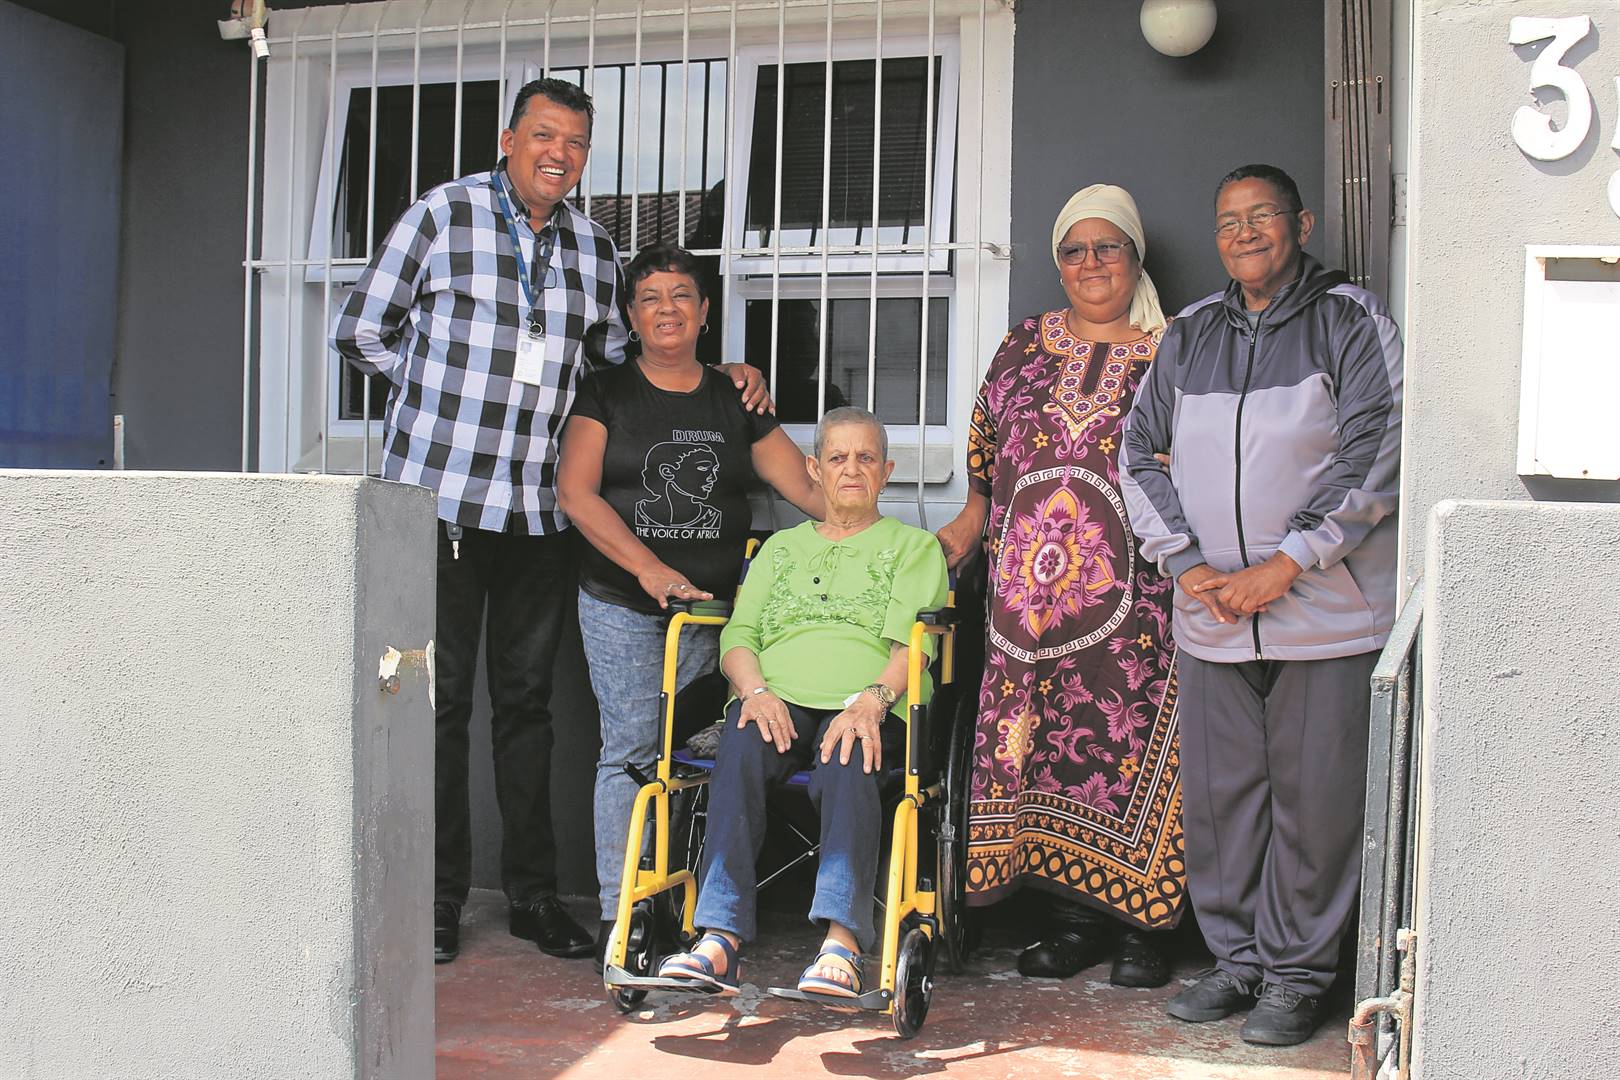 Hazel Jacobs with ward 81 councillor Ashley Potts, her daughter Geraldine Damon and neighbouthood watch members Na’ila Mcklein and Pamela Adams. Mcklein was instrumental in obtaining the wheelchair by bringing Jacobs’ plight to Potts’ attention.PHOTO: Samantha lee-Jacobs